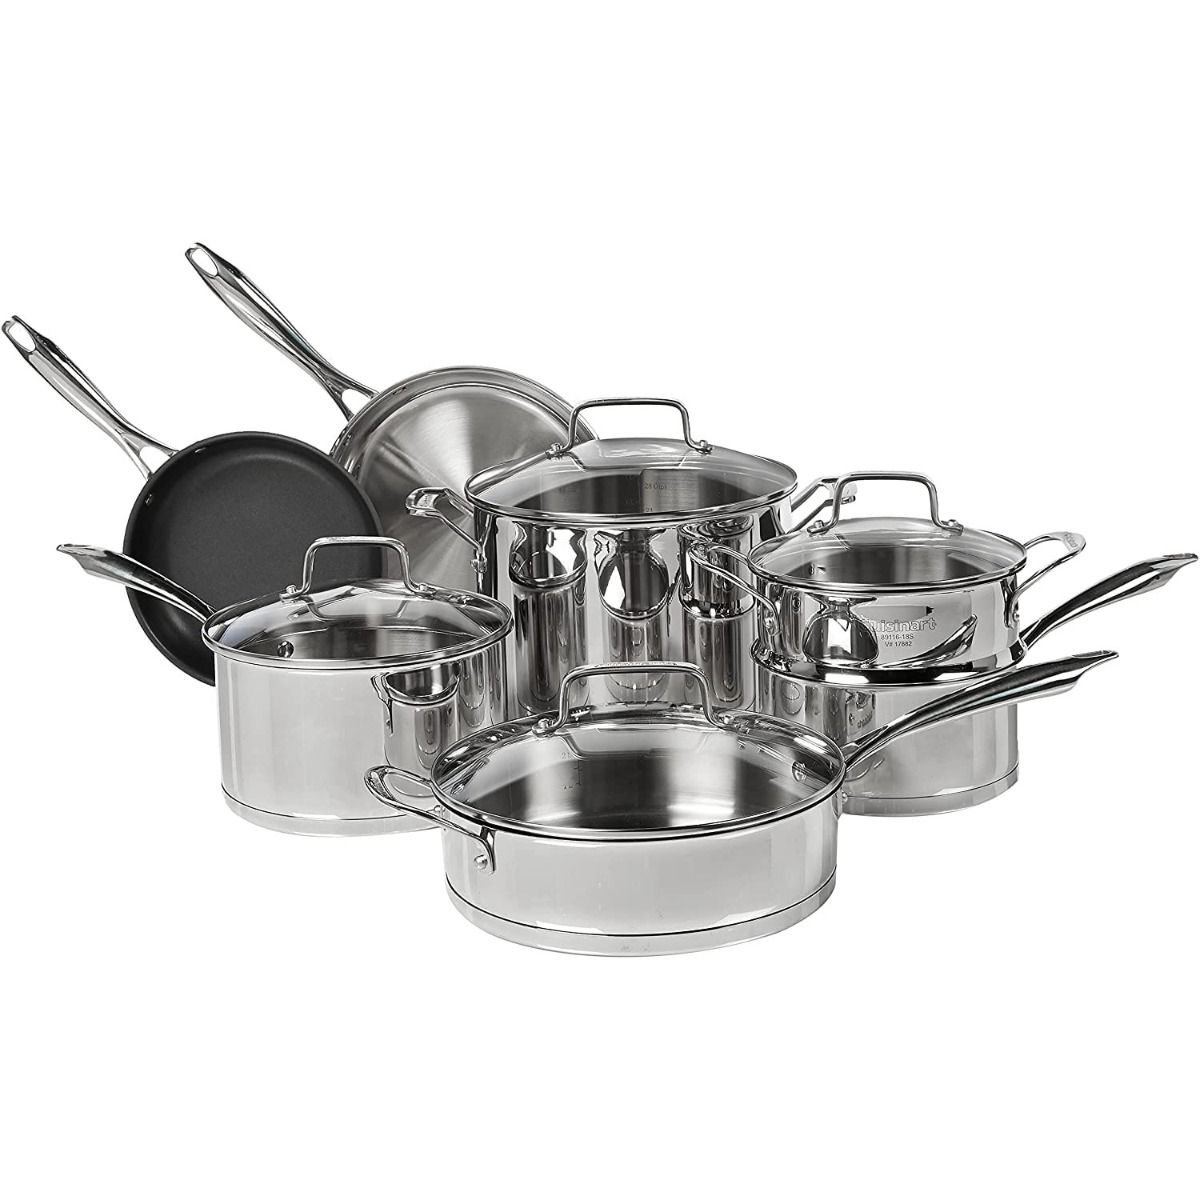 Cuisinart Chef's Classic Pro Stainless Steel Skillet Set, 2 Piece